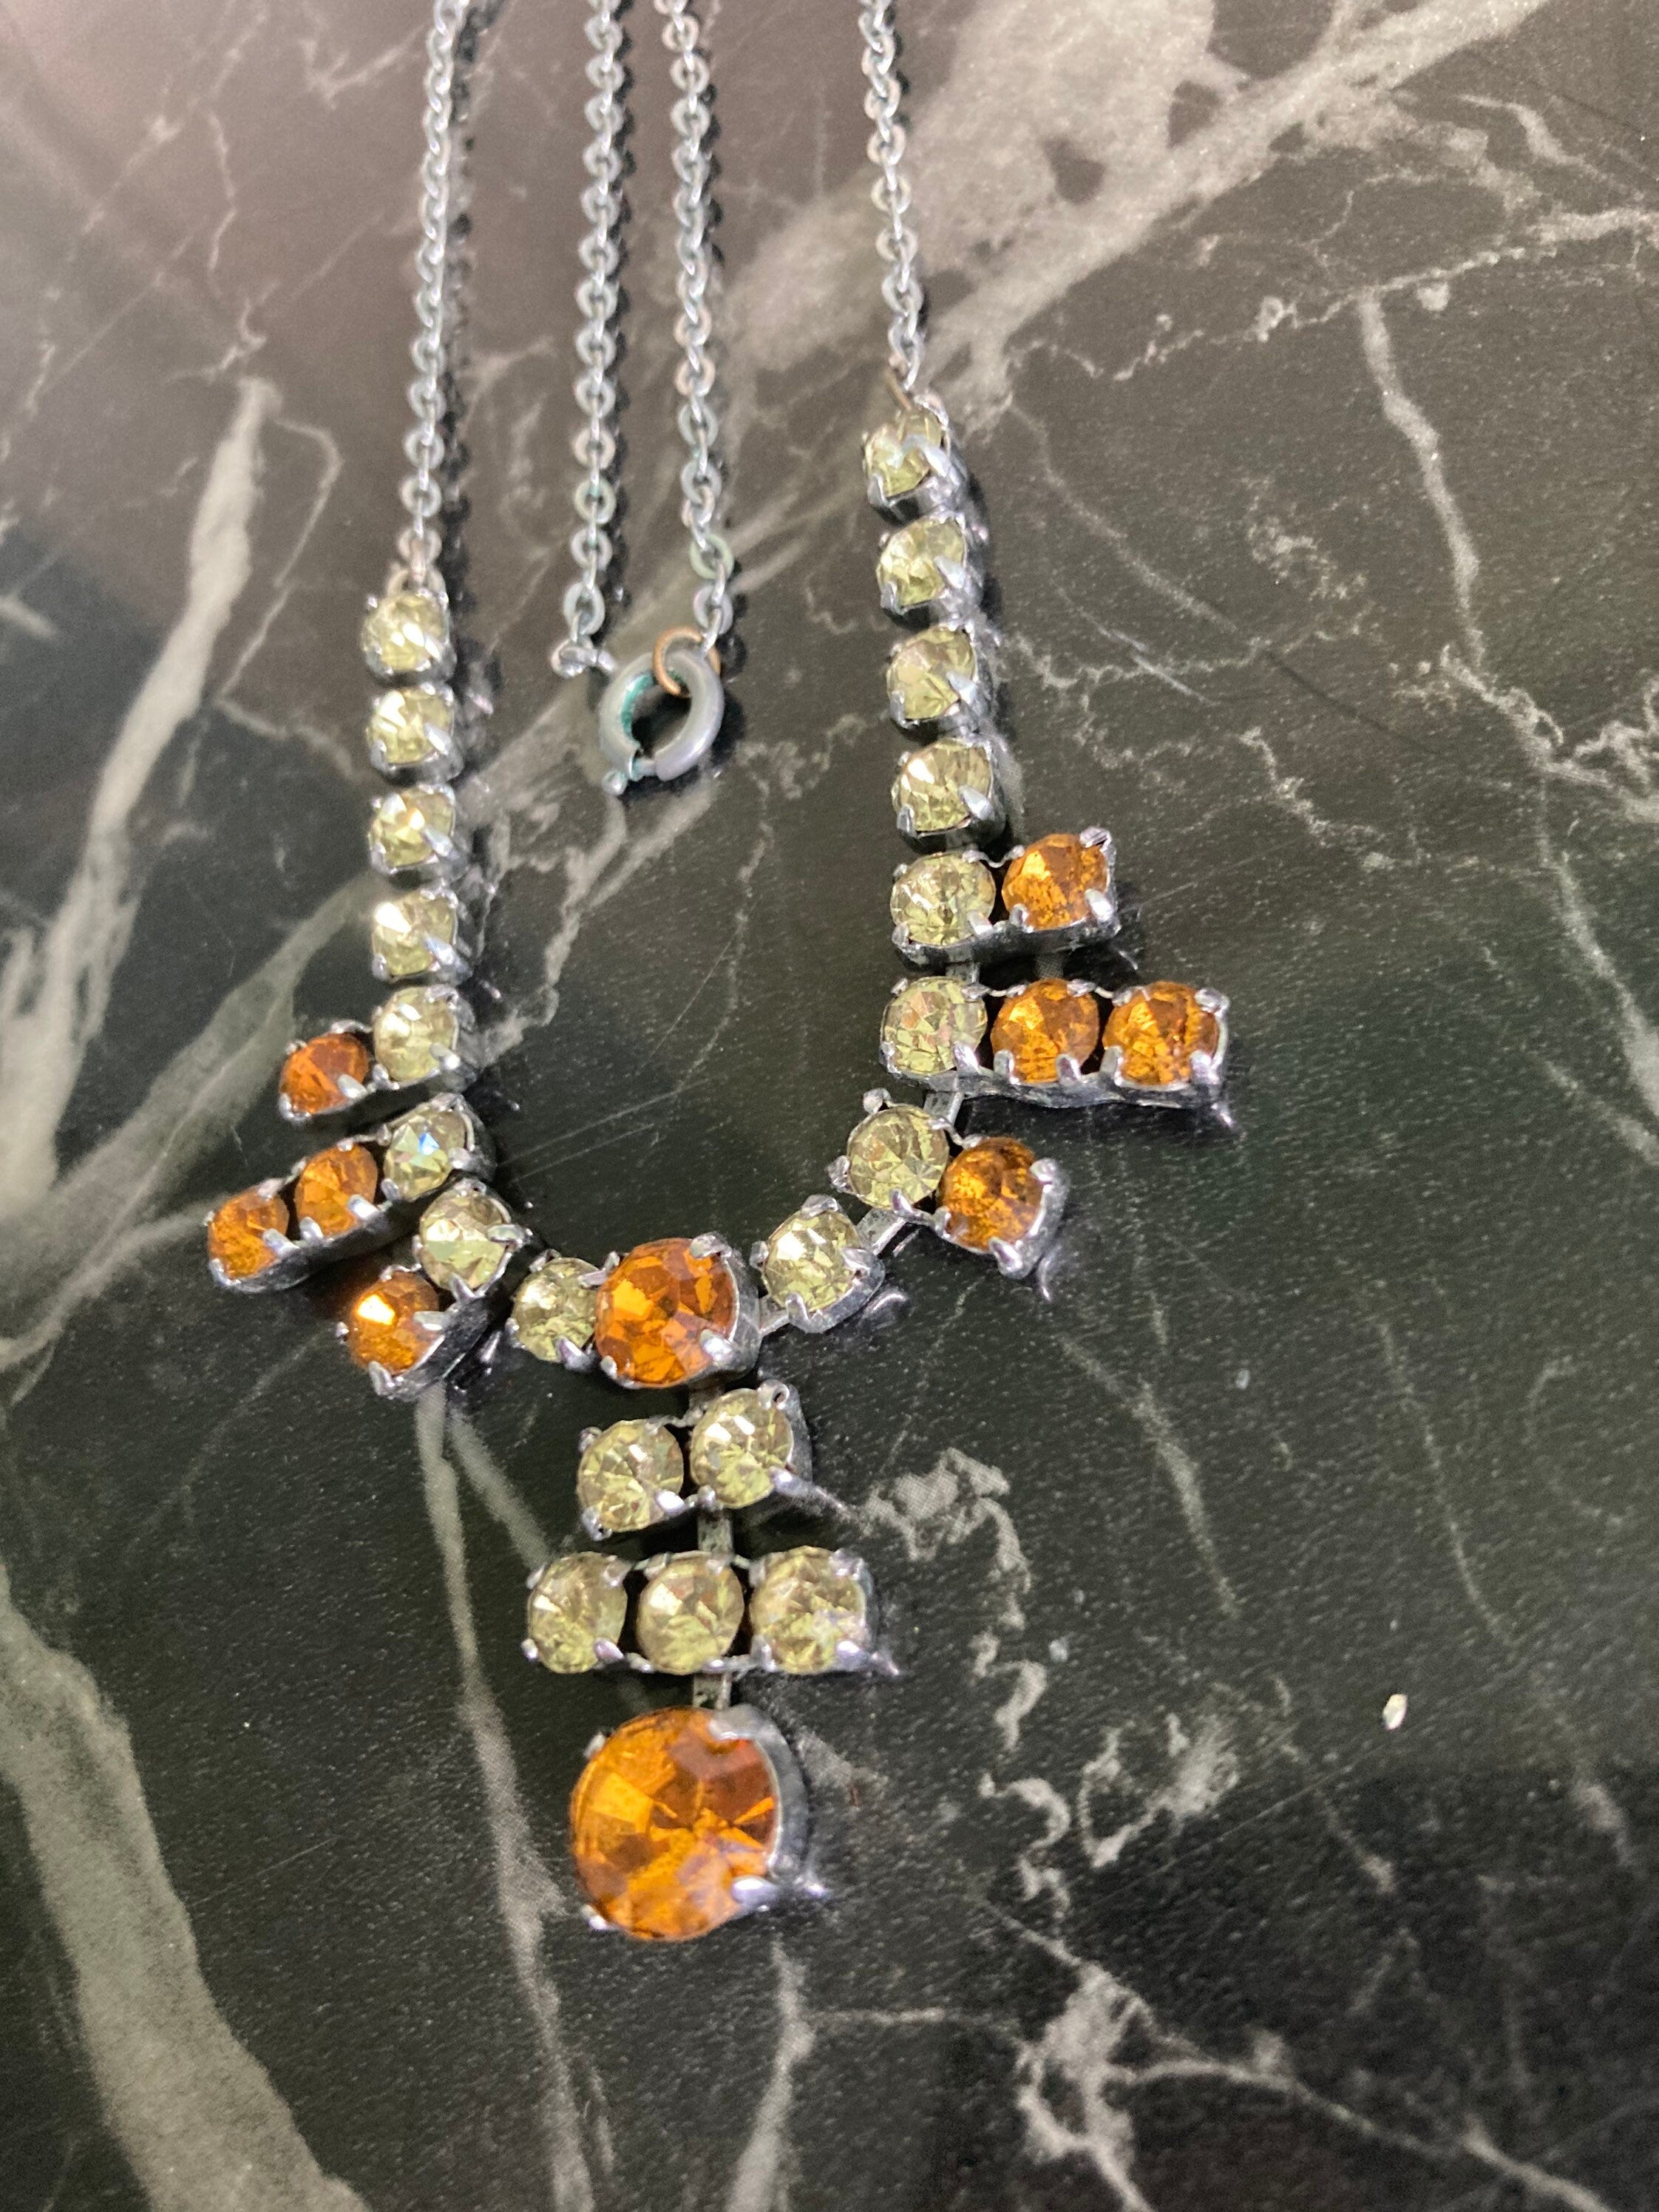 Tiger Tree | Yellow Crystal Necklace – Thousand Island Dressing